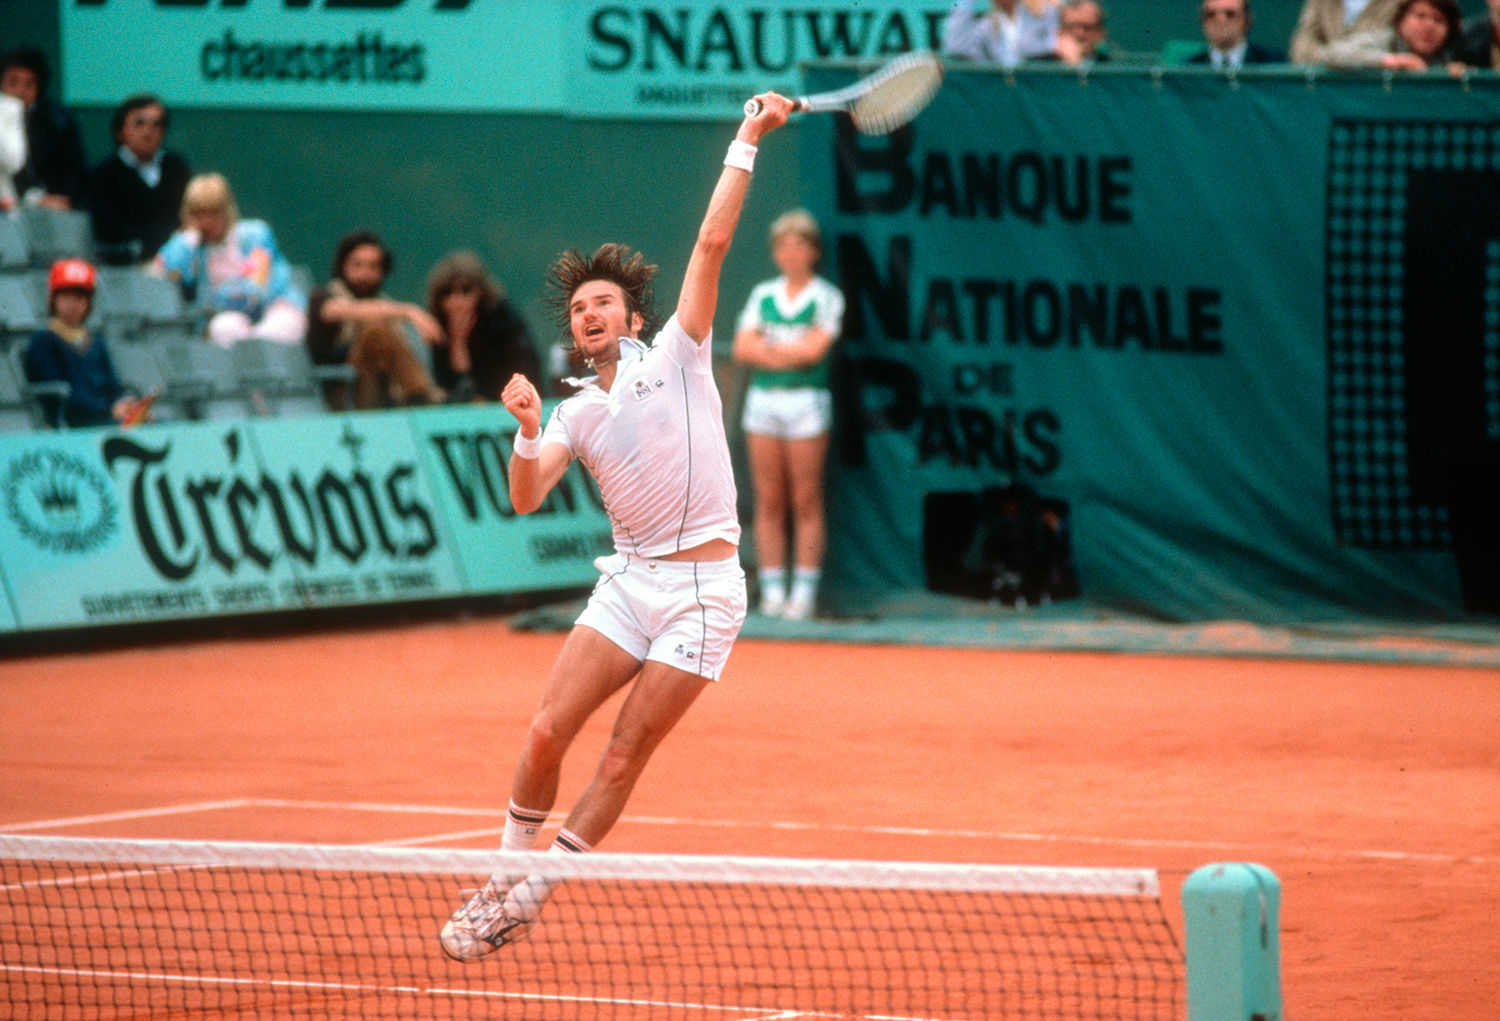 Jimmy Connors, French Open, 1981 : Tennis Historical : Photography by Adam Stoltman: Sports Photography, The Arts, Portraiture, Travel, Photojournalism and Fine Art in New York